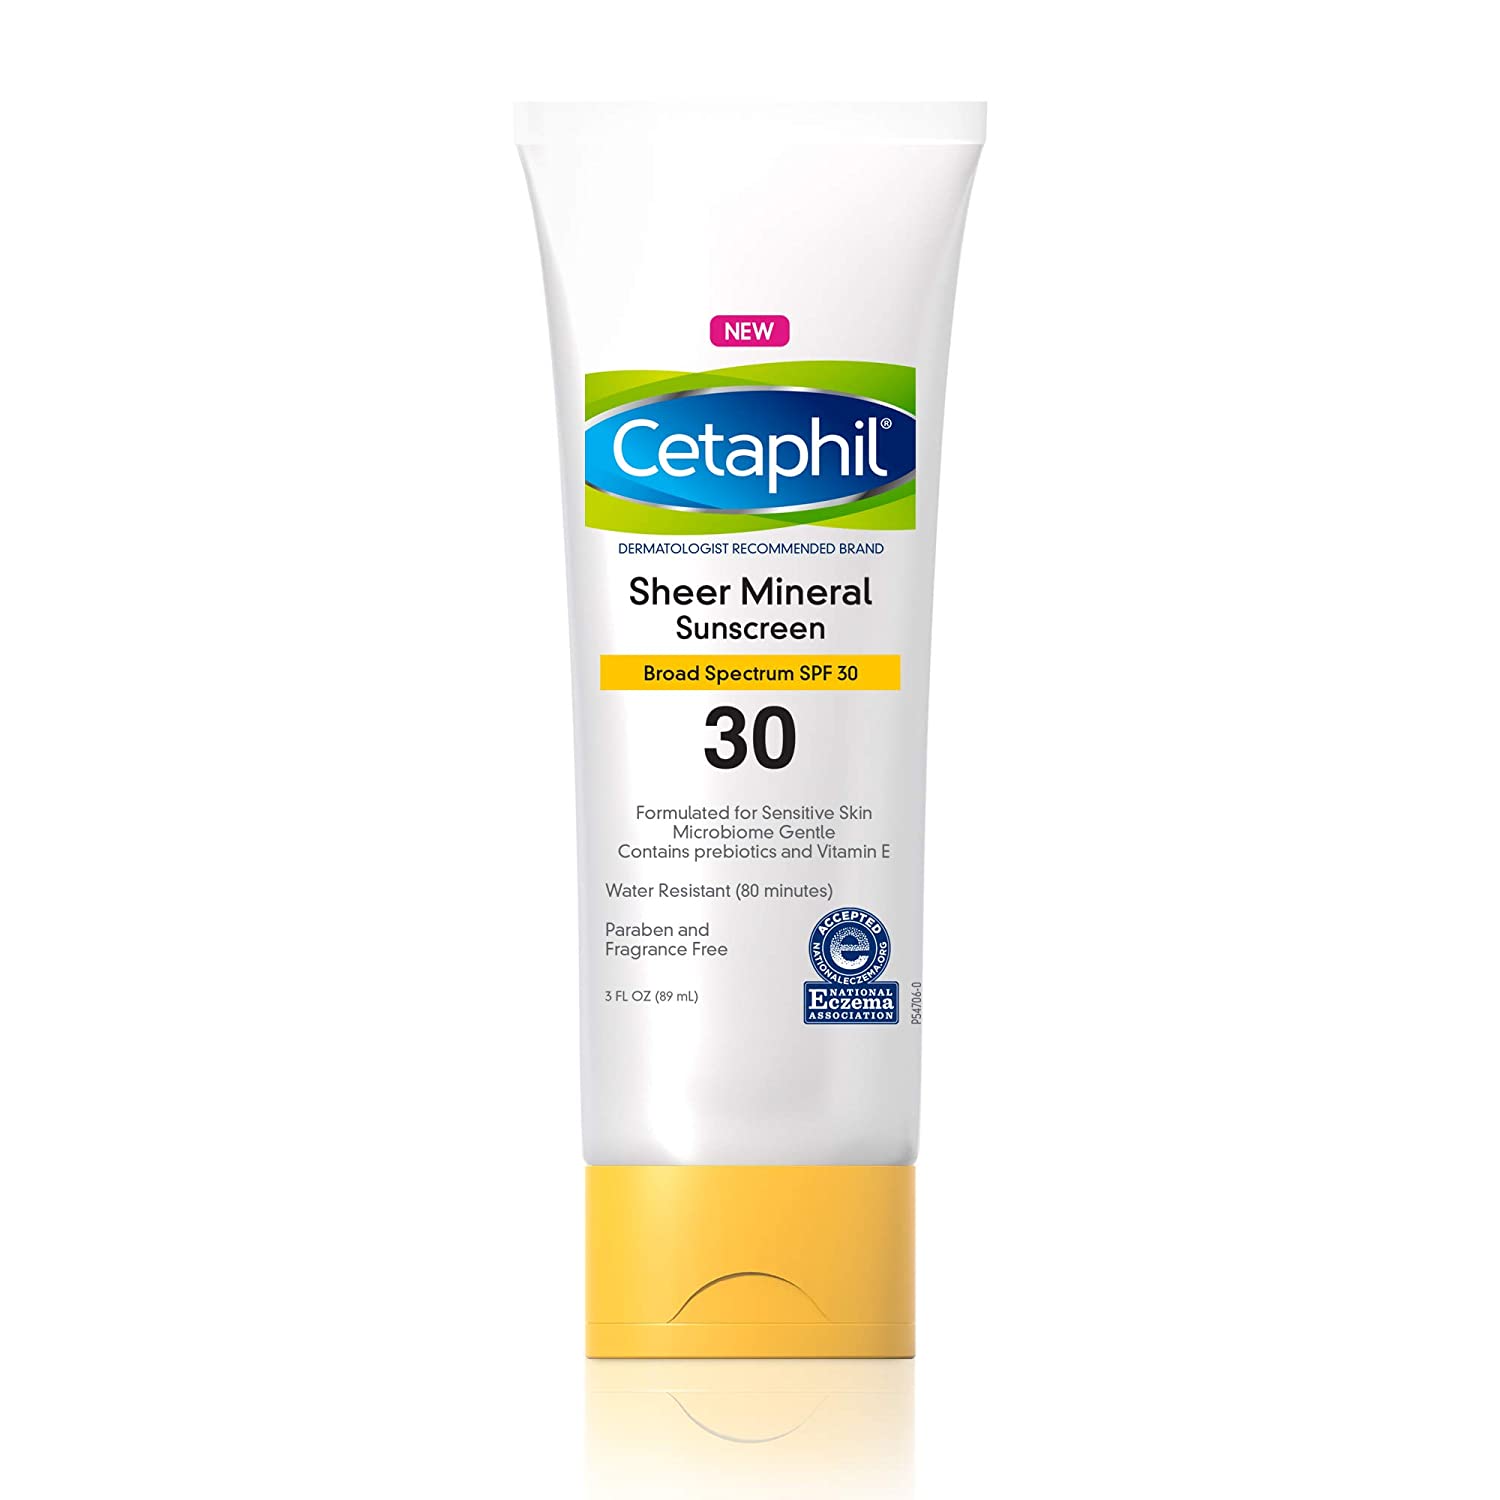 Cetaphil Sheer Mineral Sunscreen Lotion Broad Spectrum SPF 30